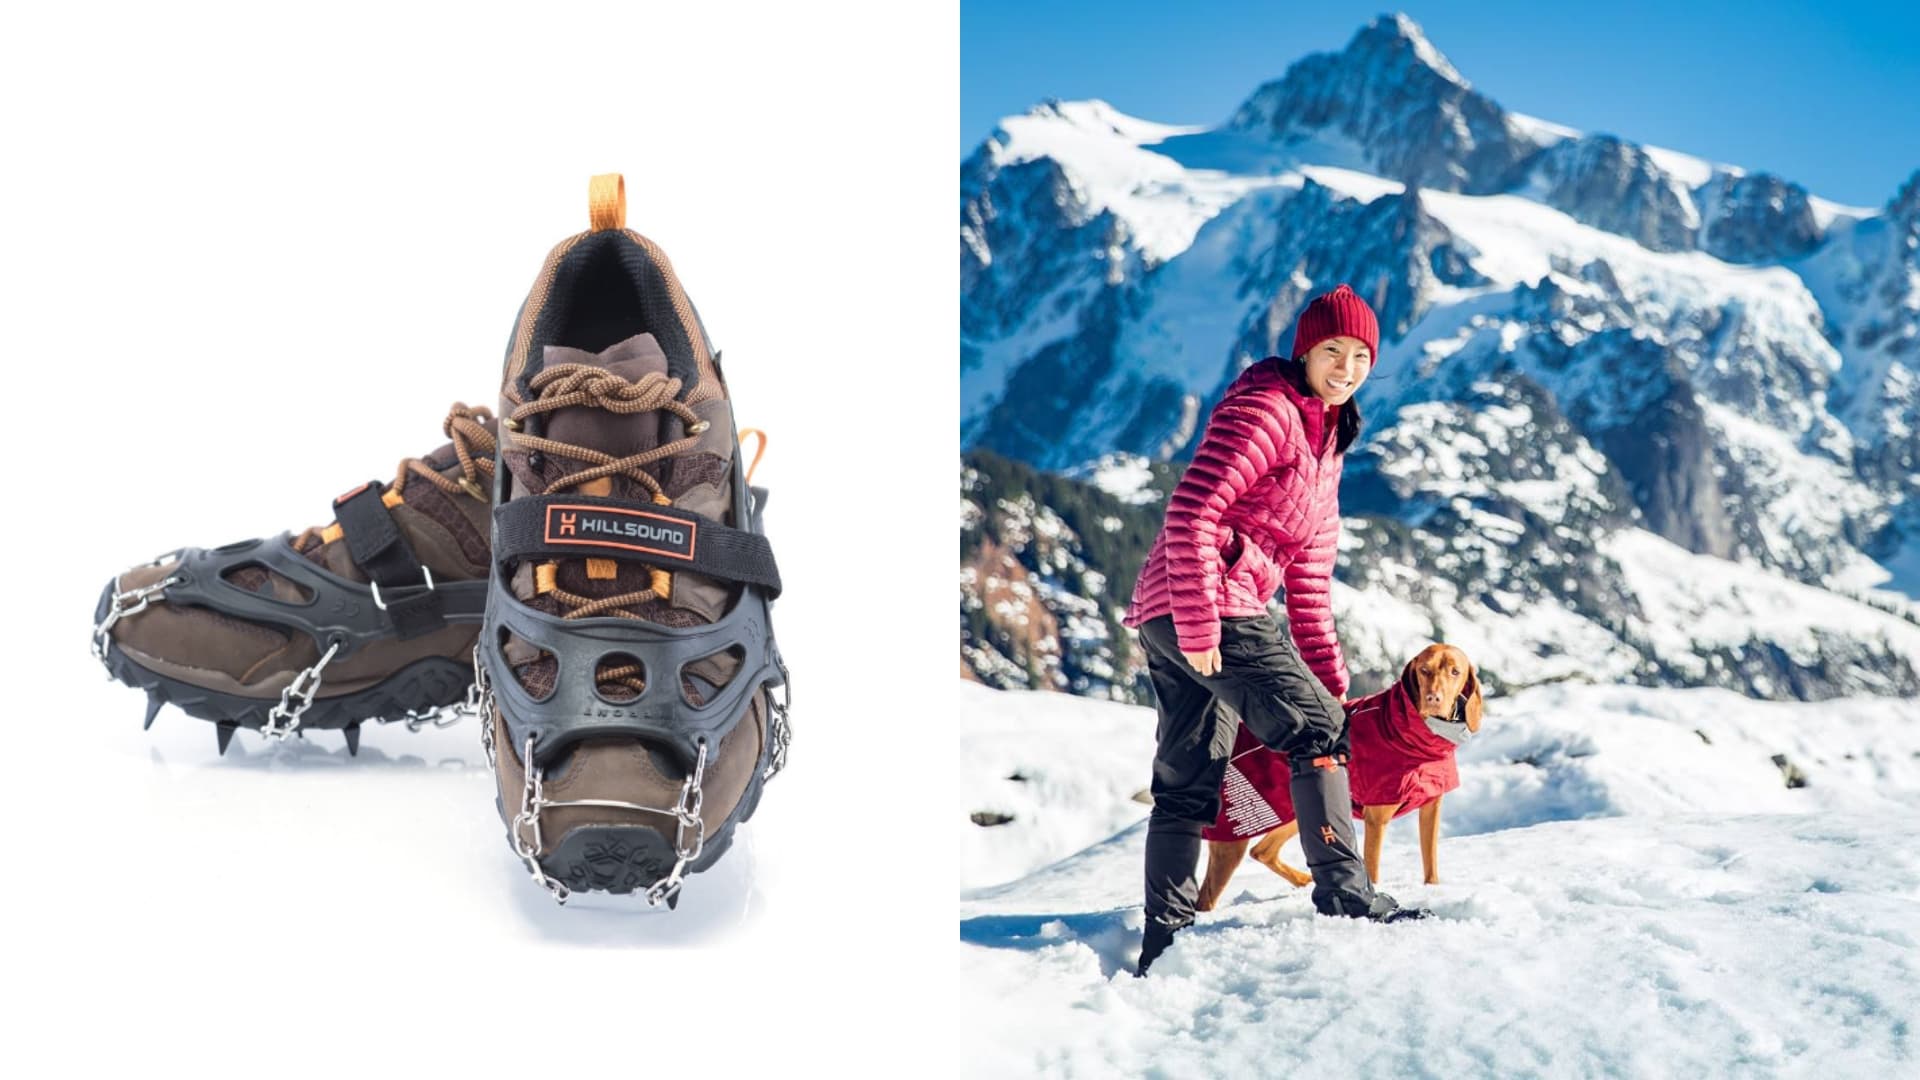 8 Indispensable Winter Camping Gear Items that Turn Freezing into Fun